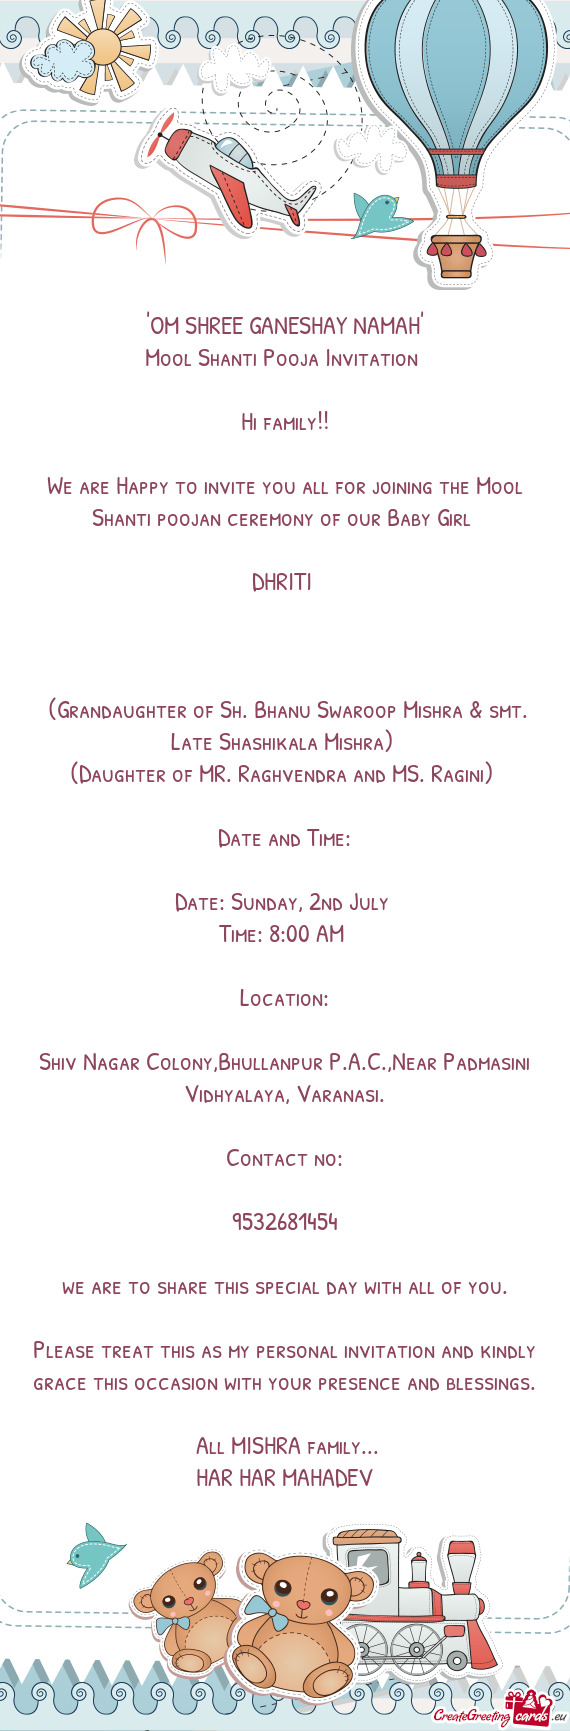 We are Happy to invite you all for joining the Mool Shanti poojan ceremony of our Baby Girl